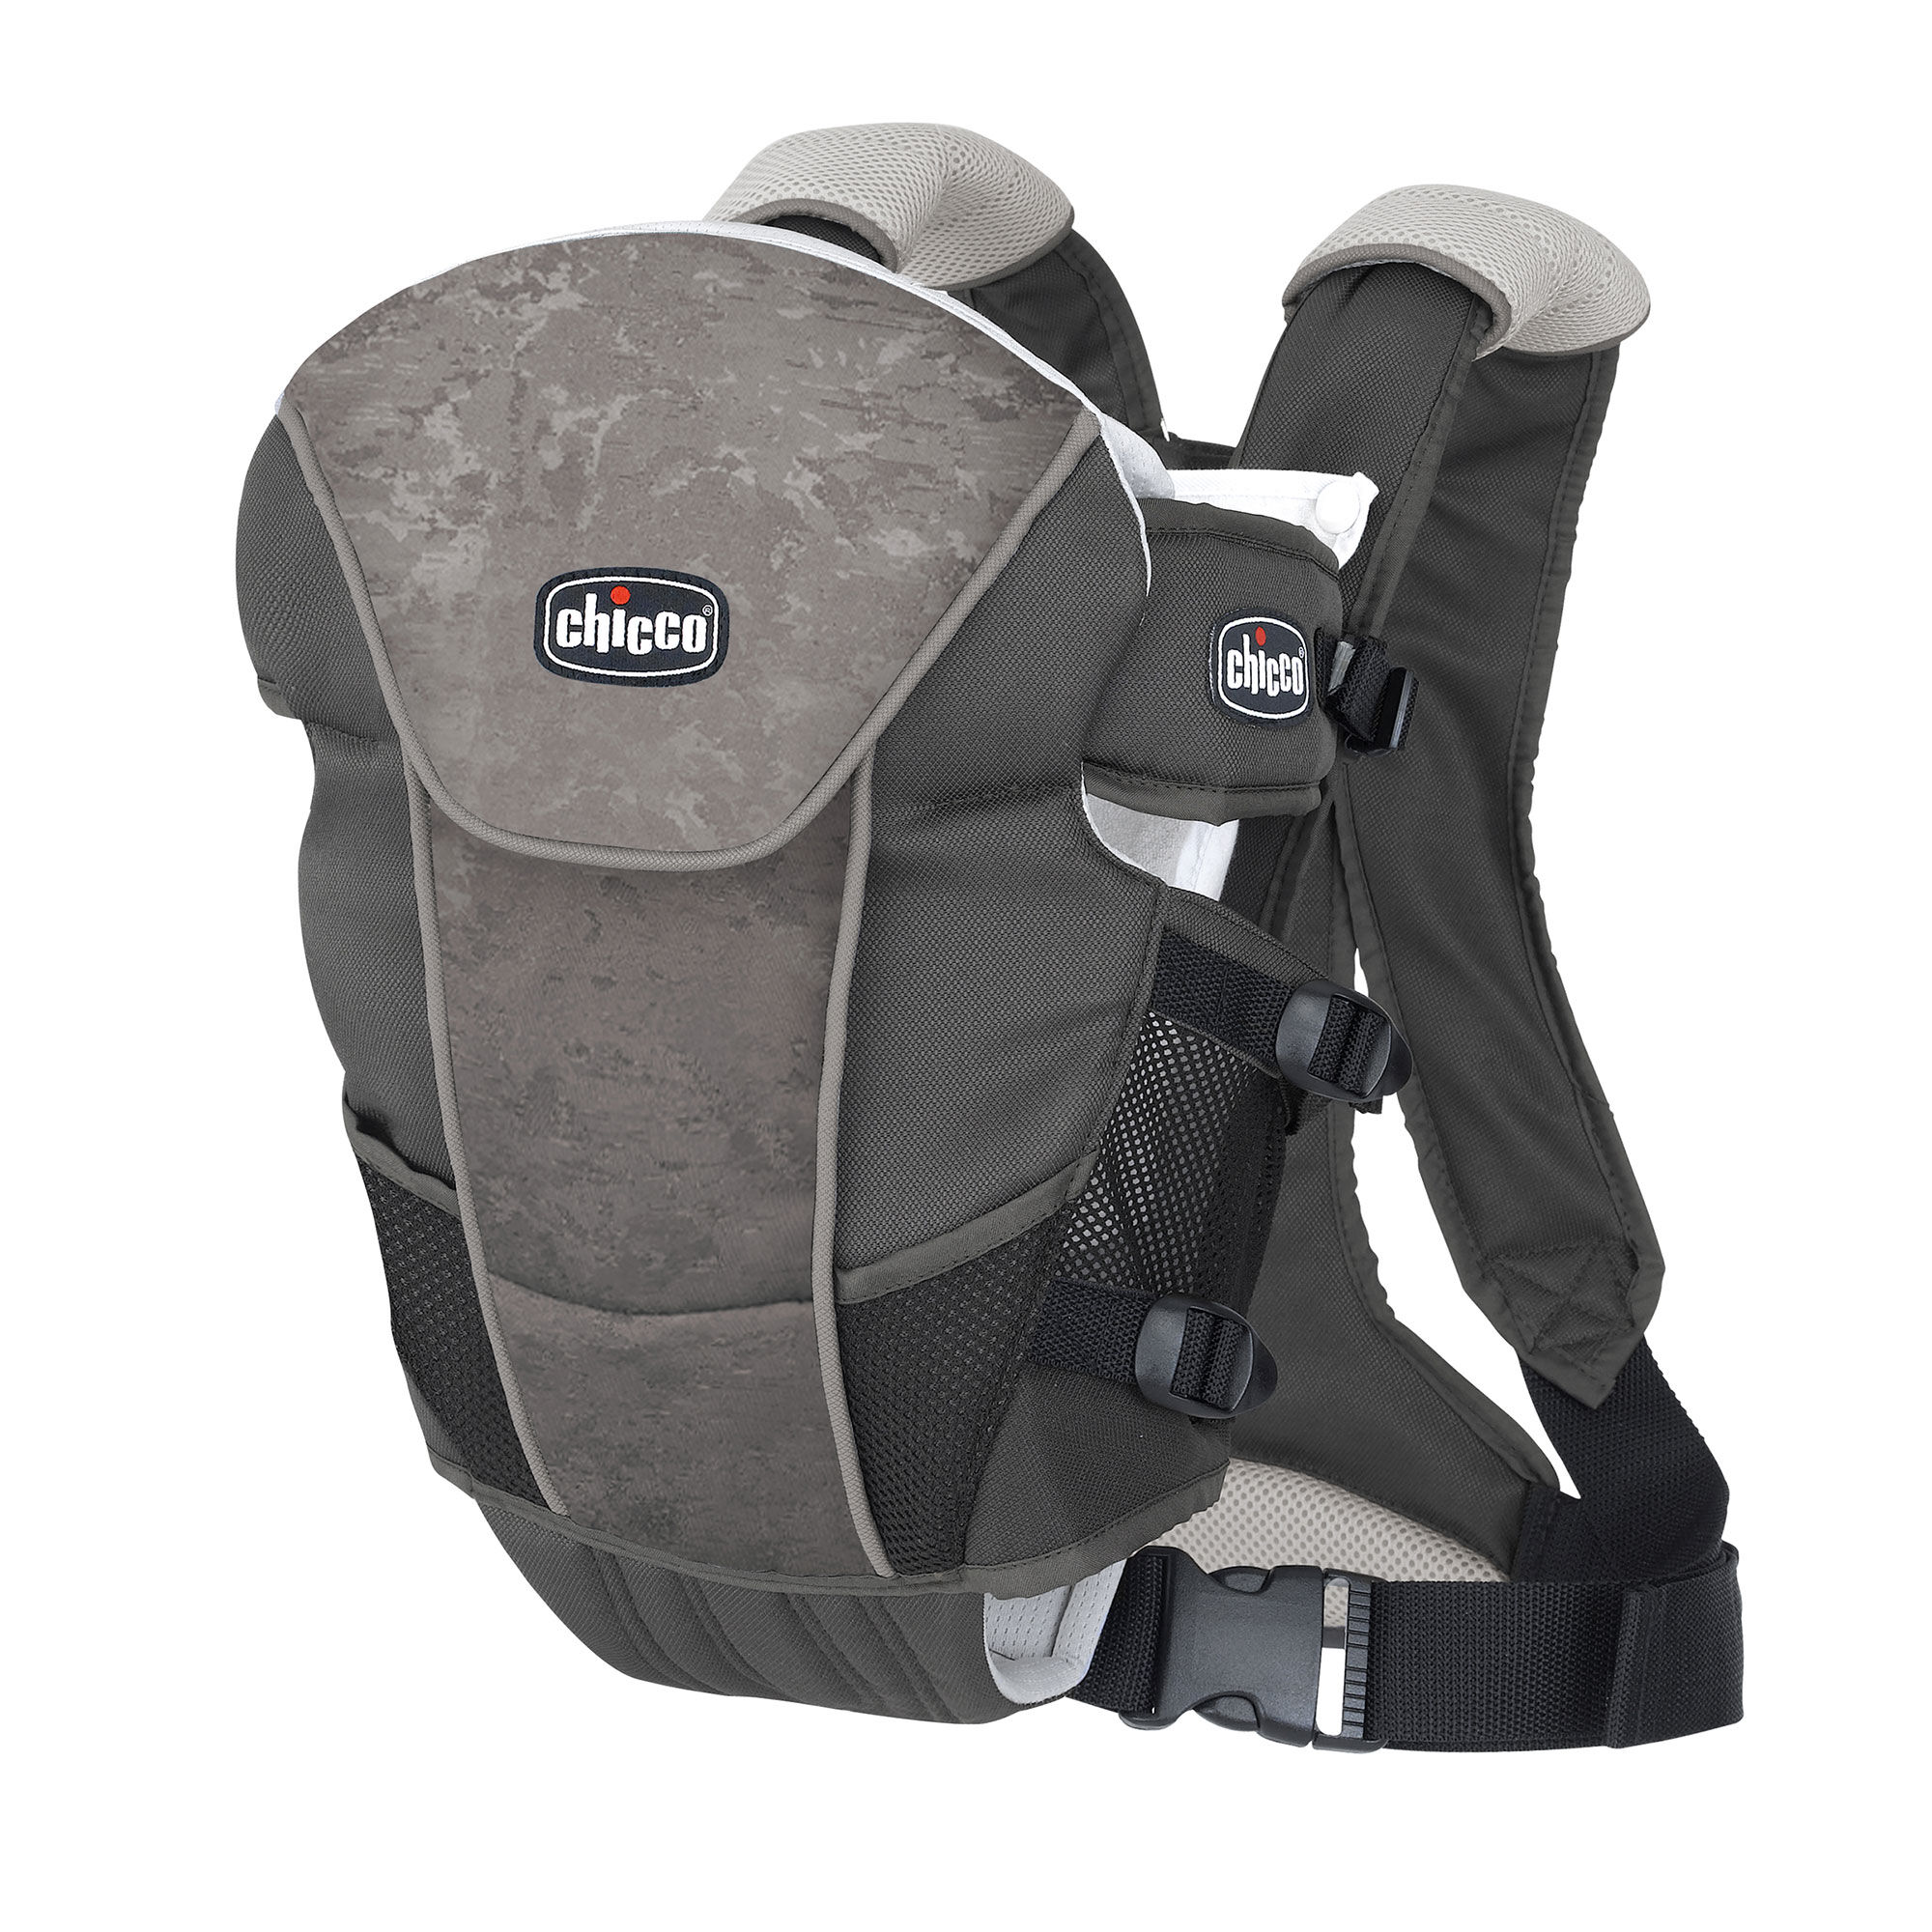 CHAMPAGNE AND BLACK CHICCO  Ultrasoft Infant Carrier 2 way 7.5 to 25lbs 